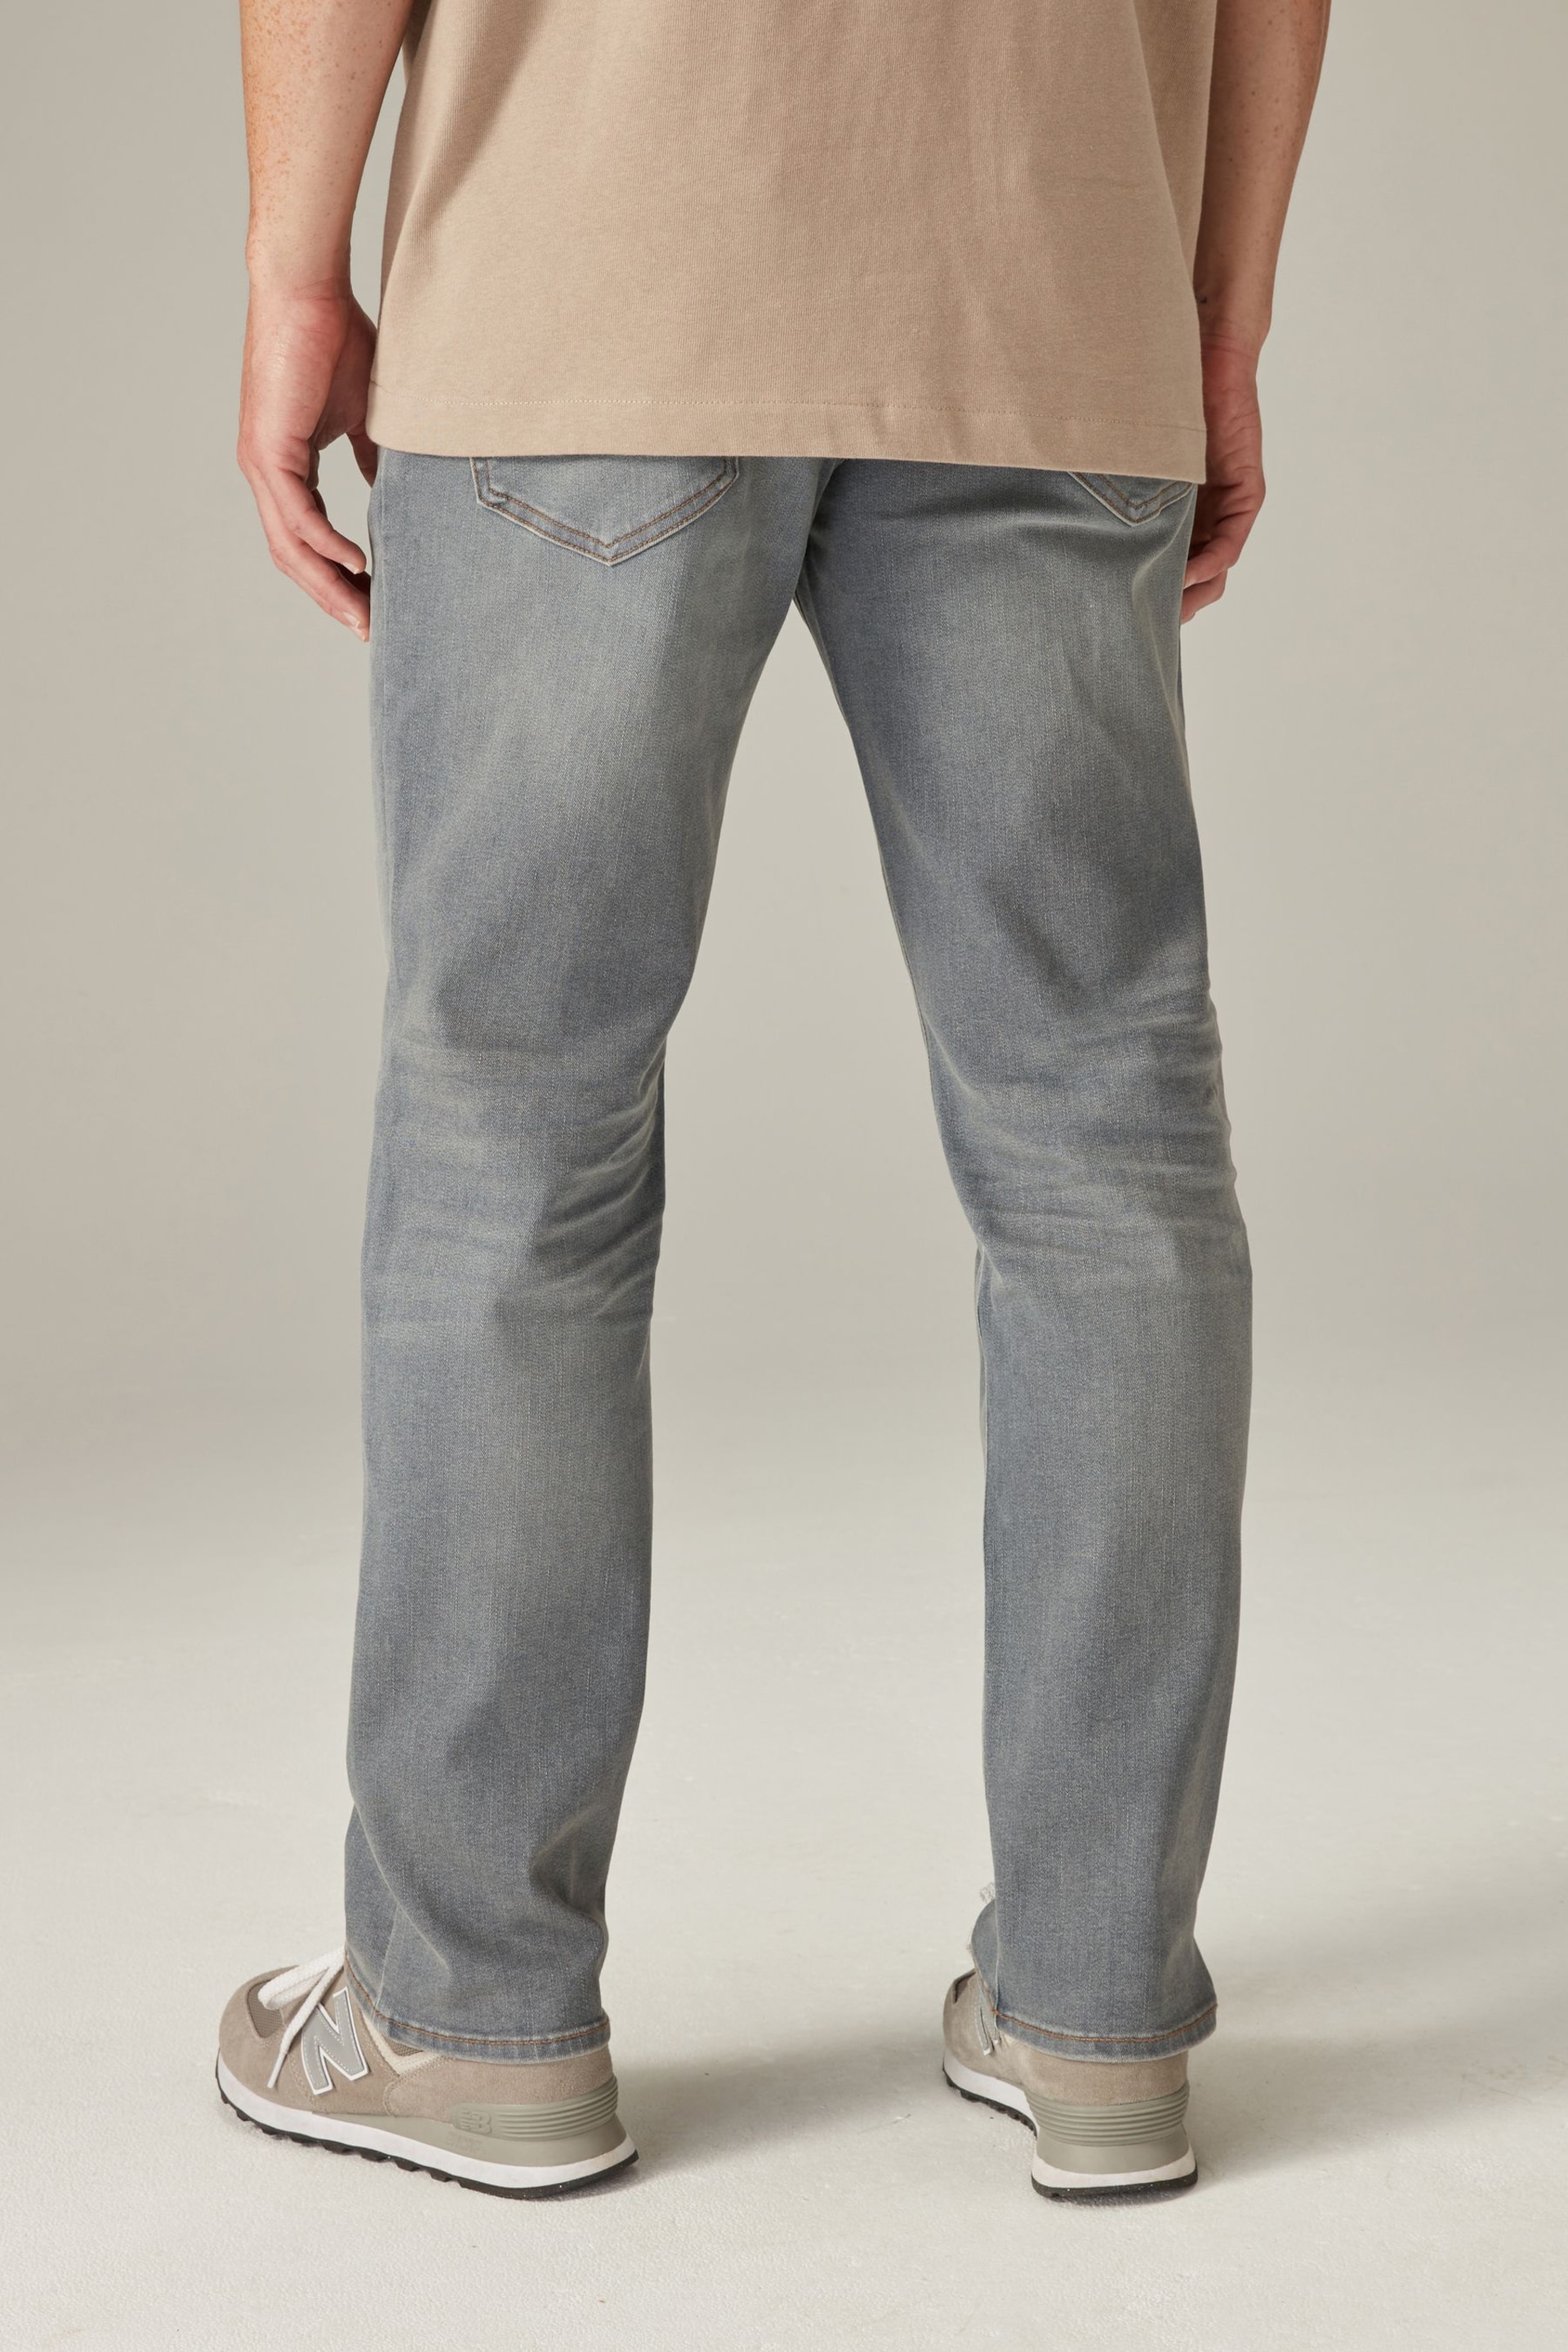 Light Grey Straight Fit Motion Flex Jeans - Image 5 of 12